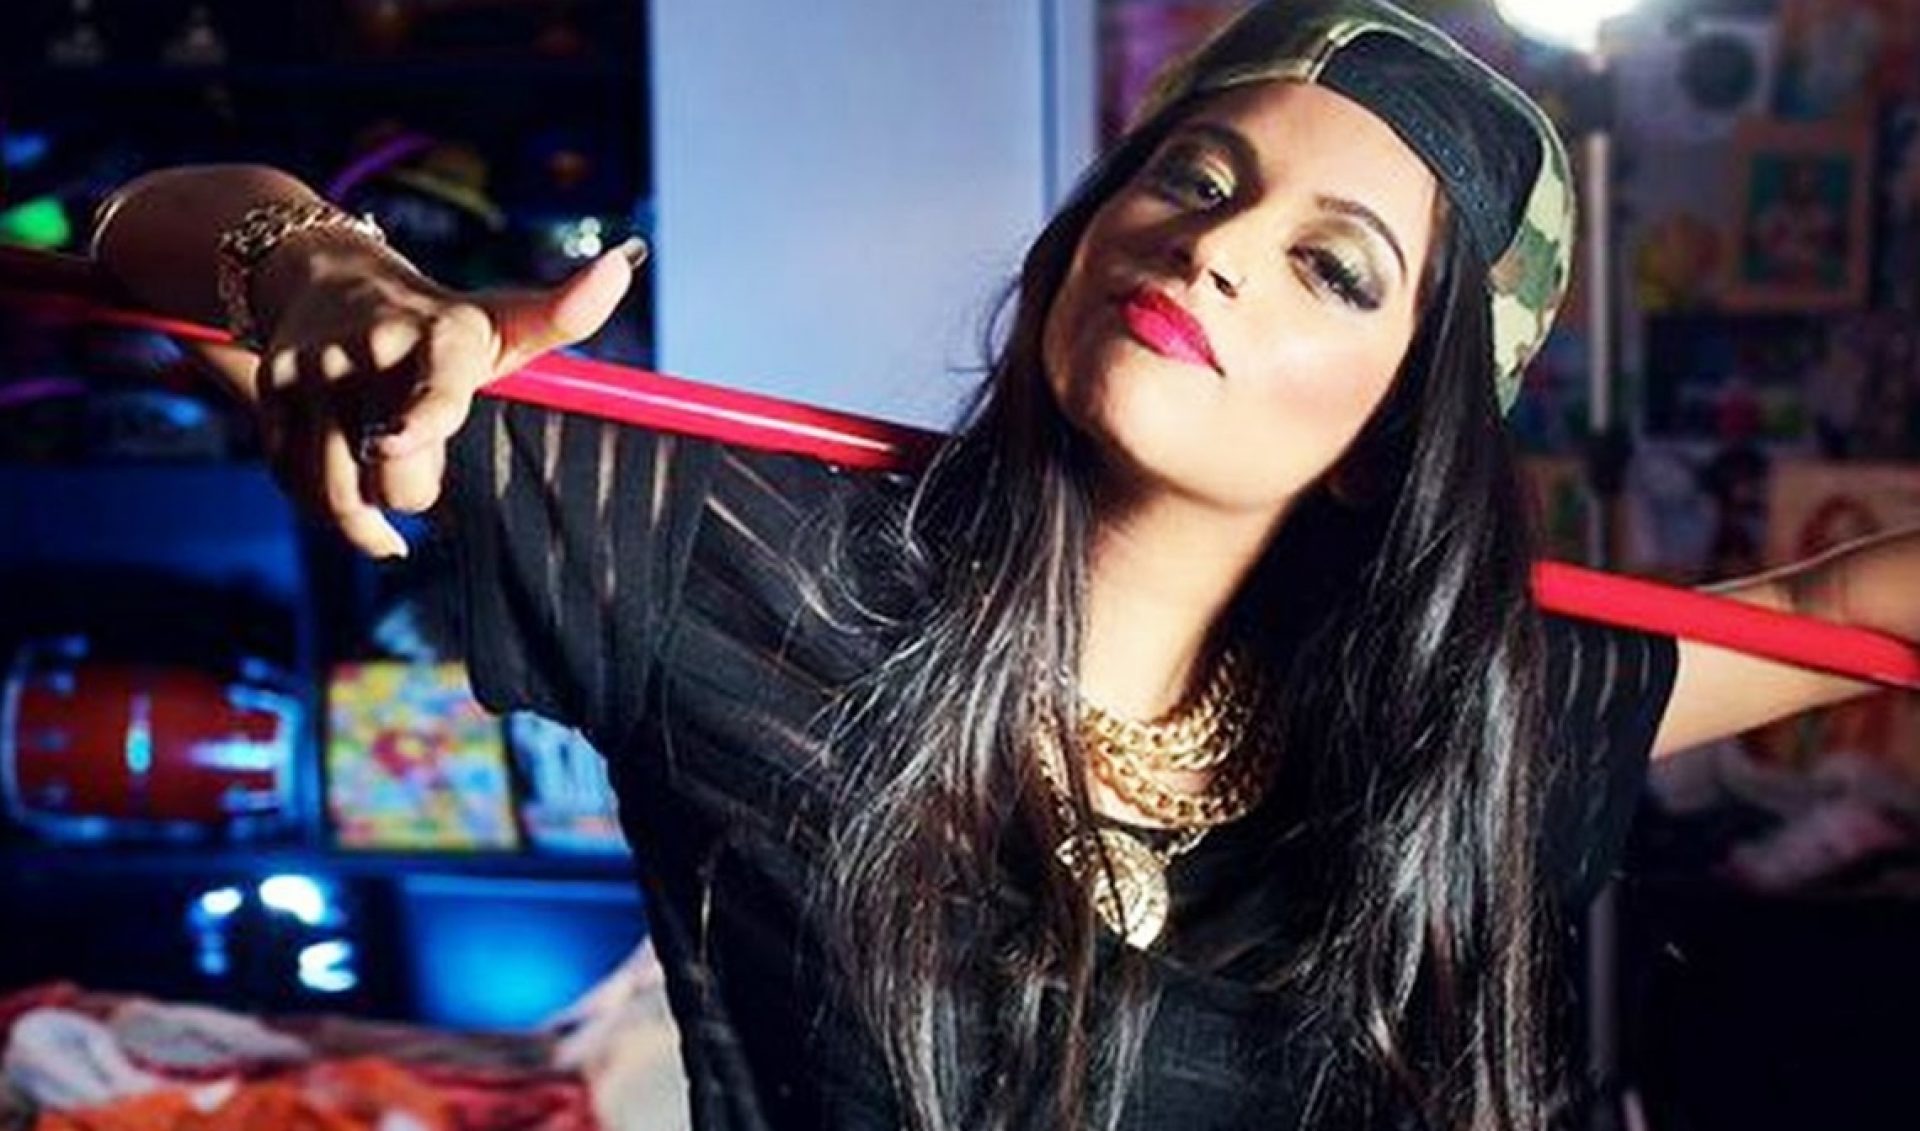 Lilly Singh Among Digital Media Standouts On Forbes’ Latest ‘30 Under 30’ List